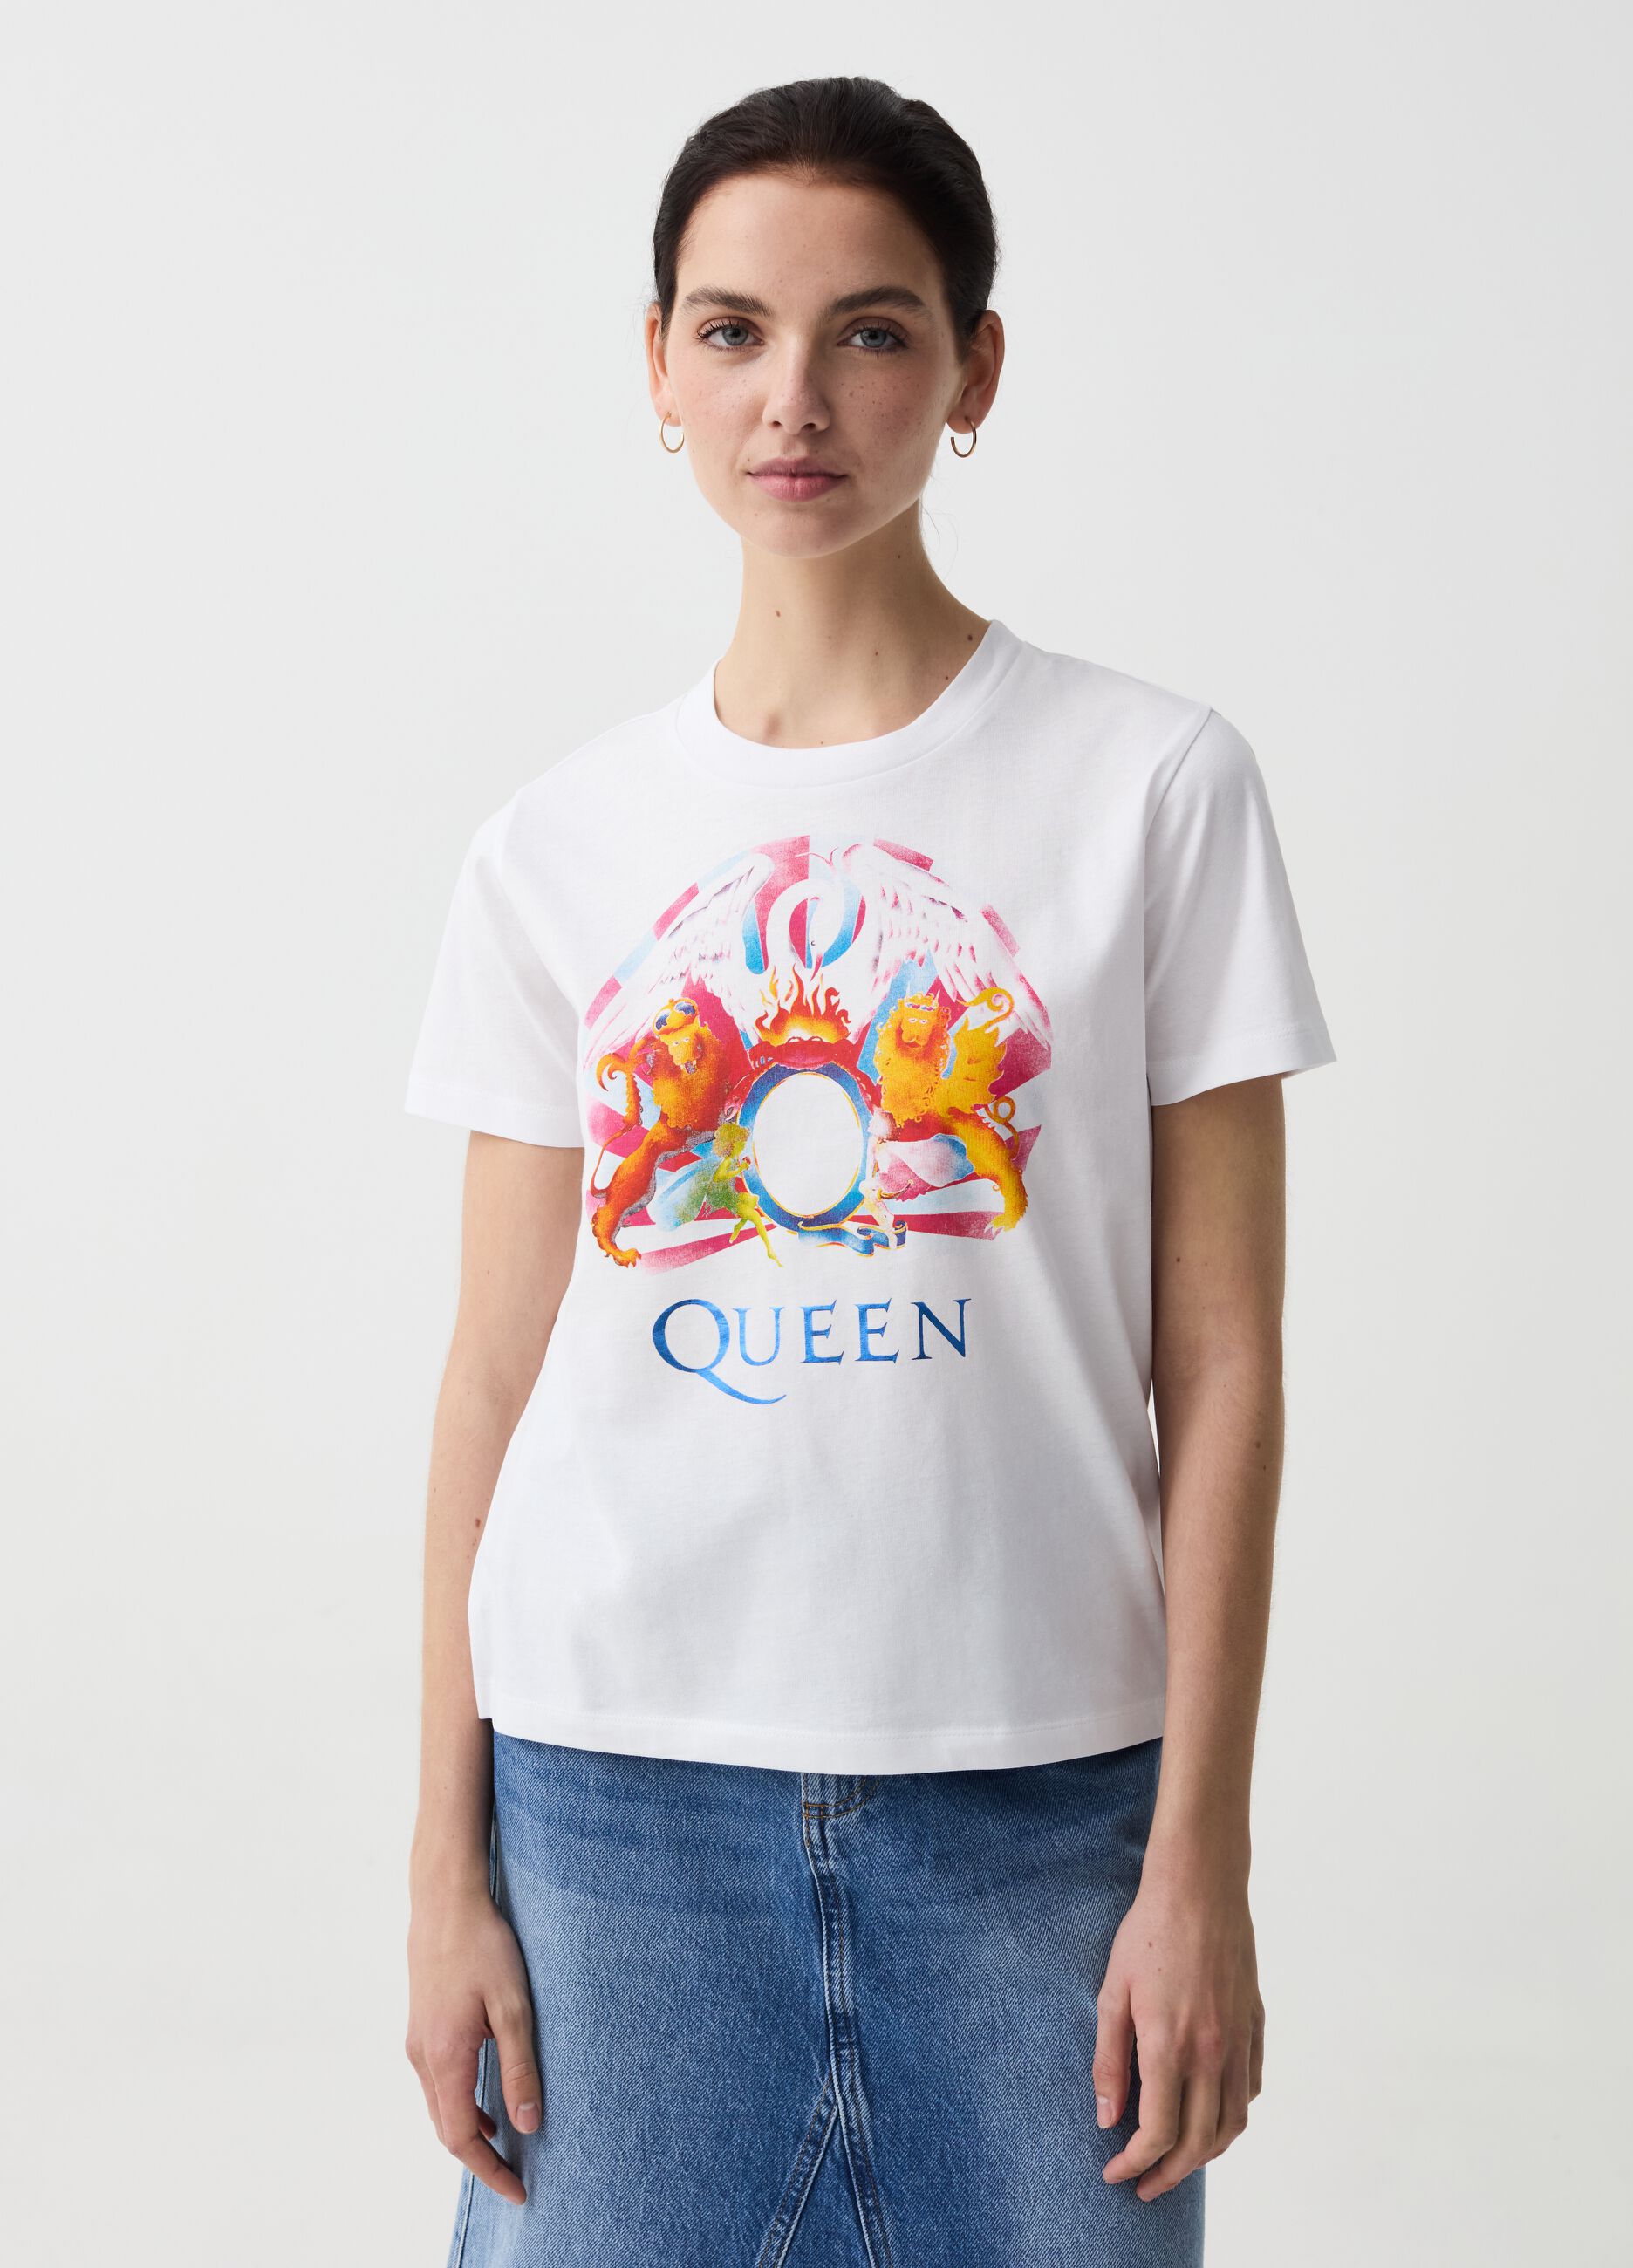 T-shirt con stampa Queen in foil